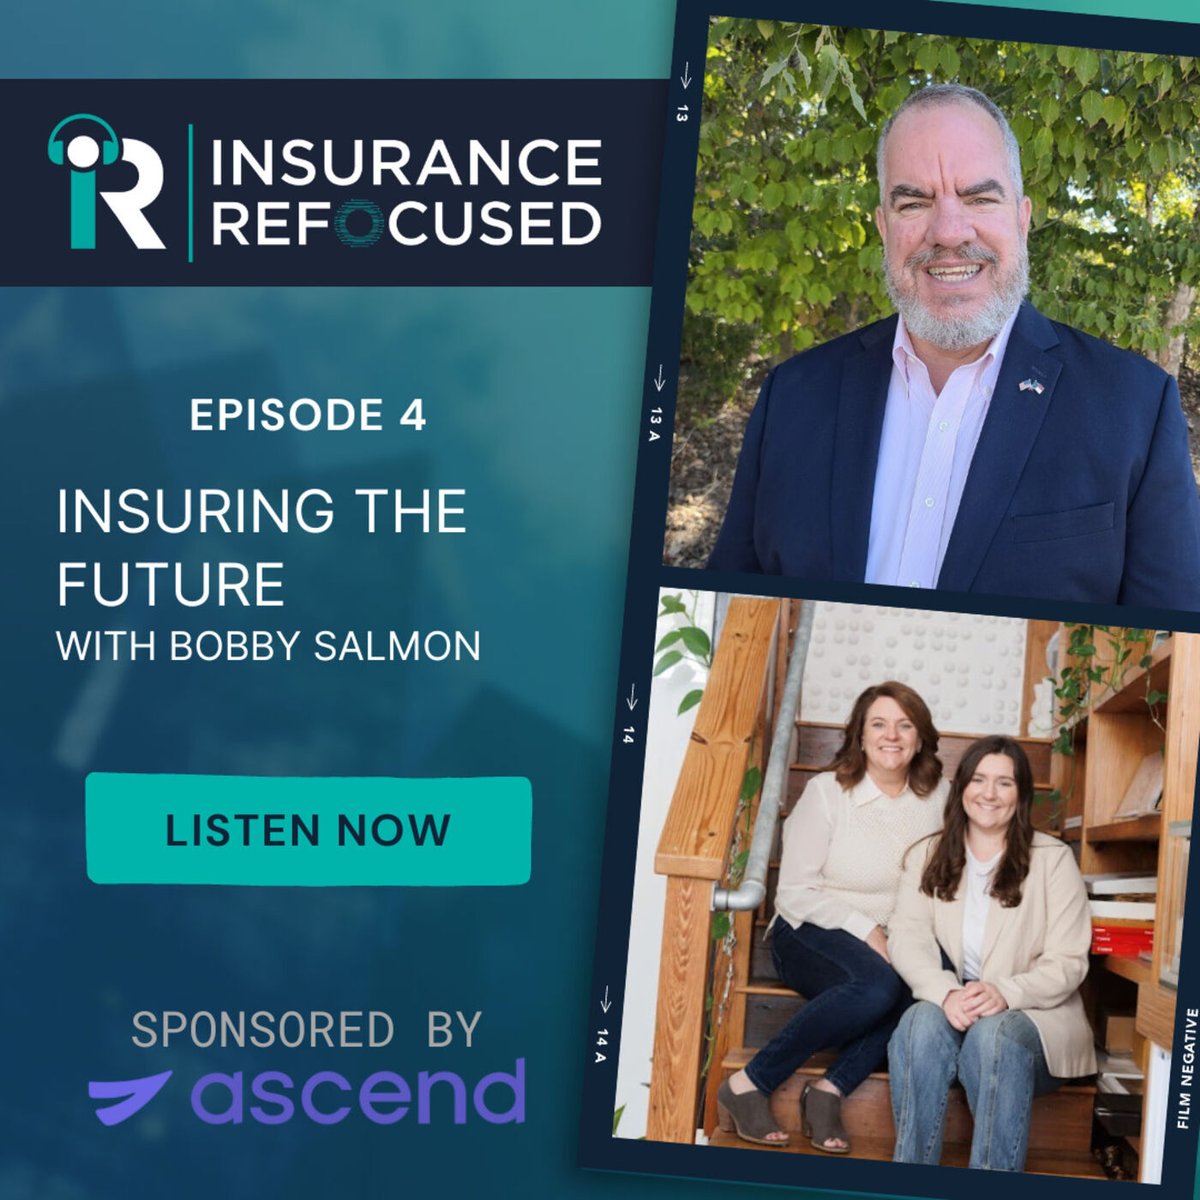 Episode 4 - Insuring the Future with Bobby Salmon